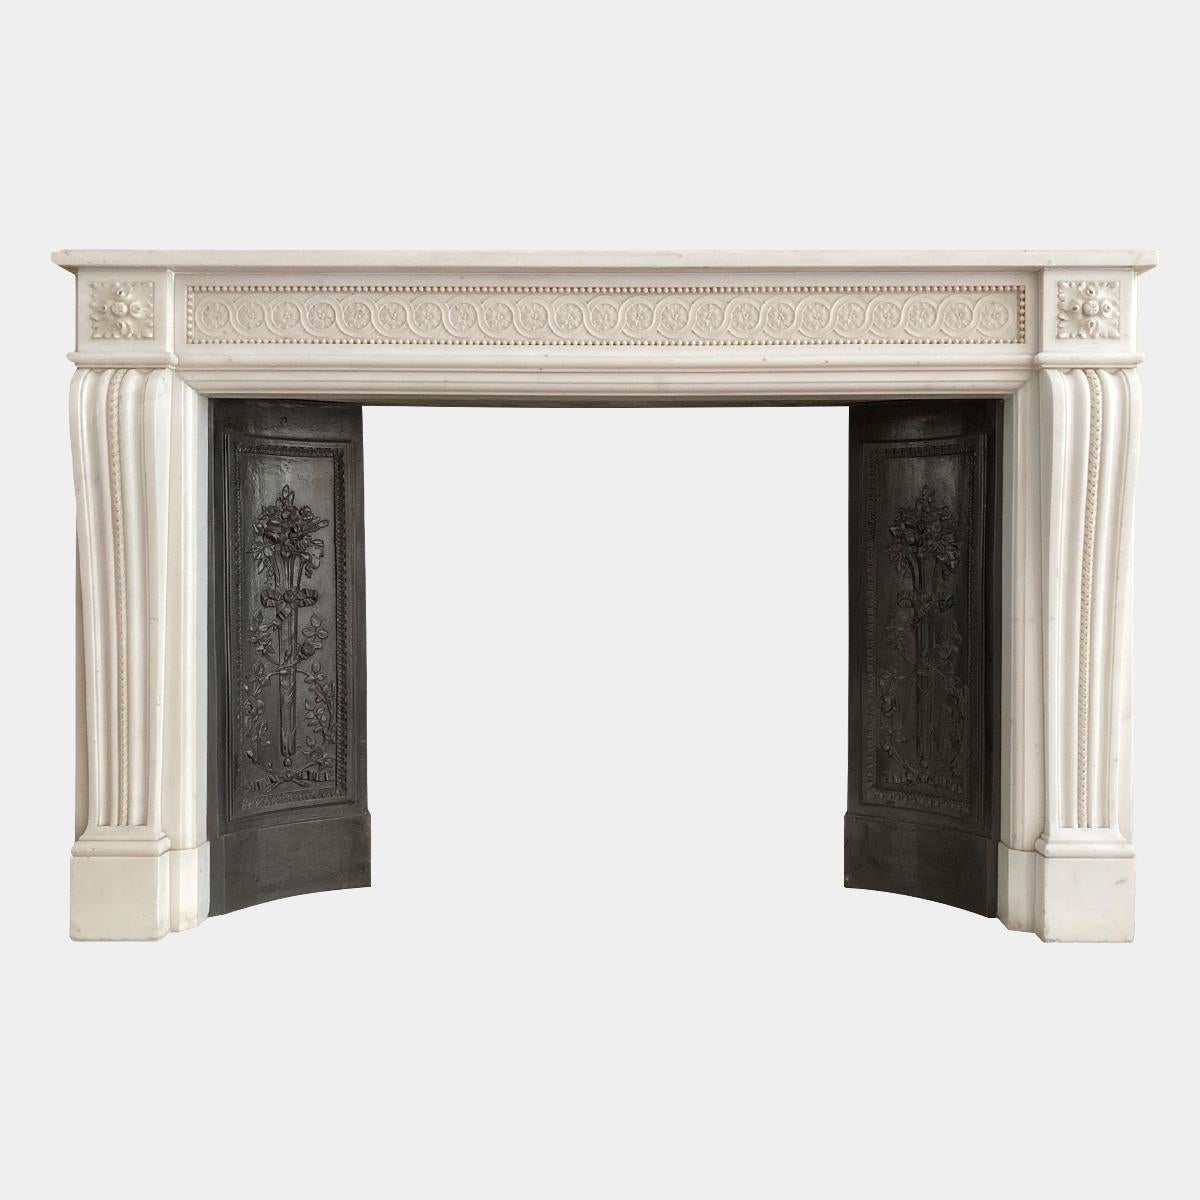 A large superior quality statuary white marble French fireplace surround in the Louis XVI style. The tapering console jambs with scaled carving within deep fluted mouldings, surmounted by square Patarae corner blocks. The beaded frieze having carved